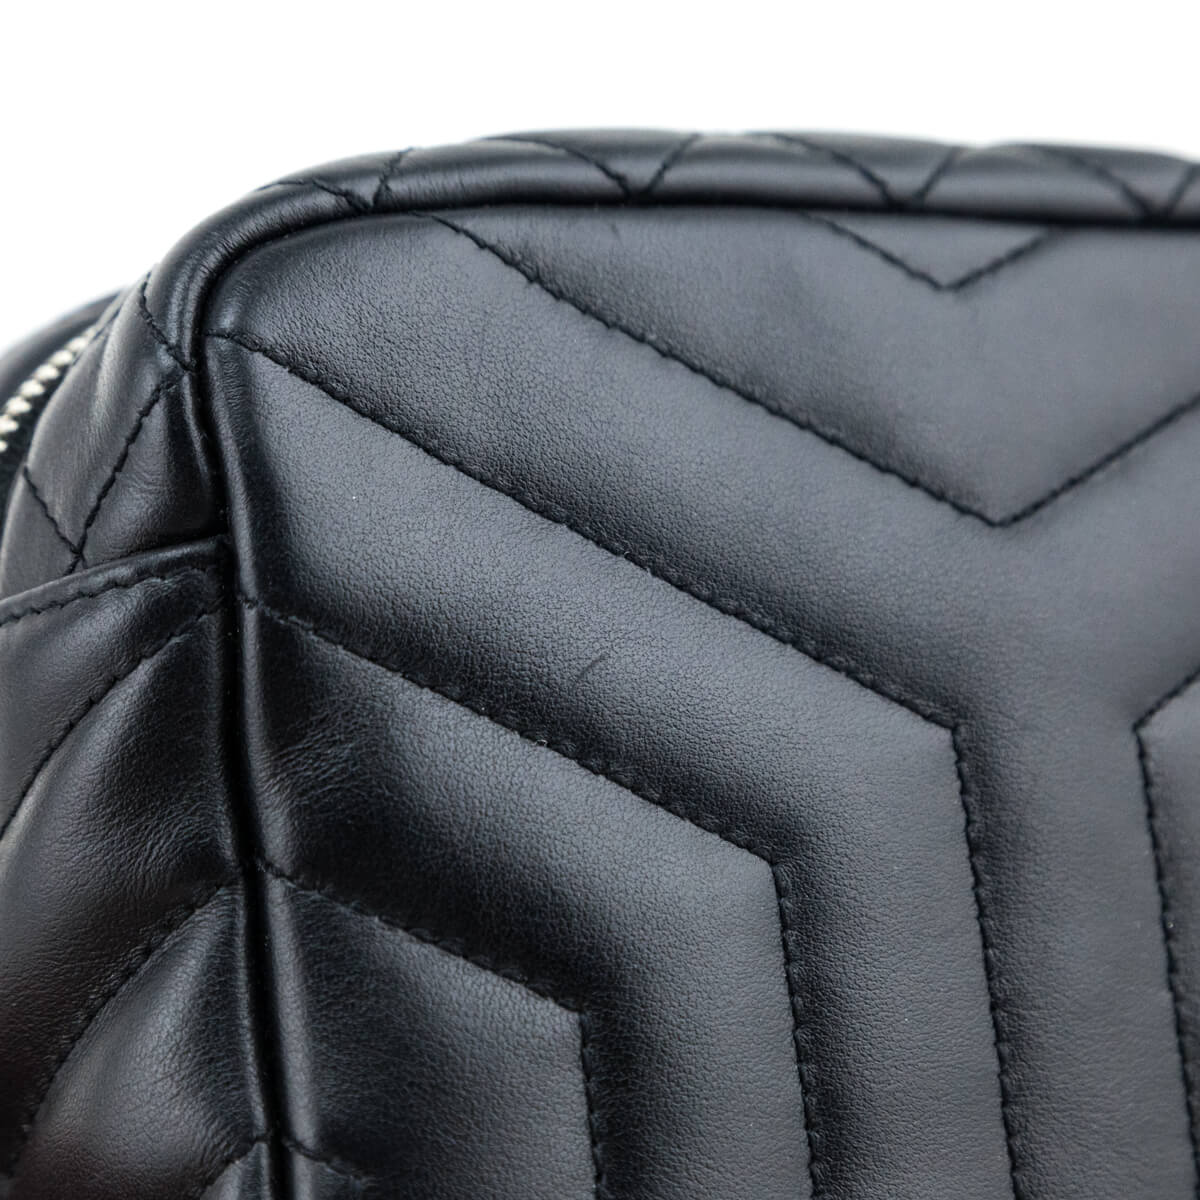 Saint Laurent Black Y Quilted Leather Mini LouLou Bowling Bag - Love that Bag etc - Preowned Authentic Designer Handbags & Preloved Fashions